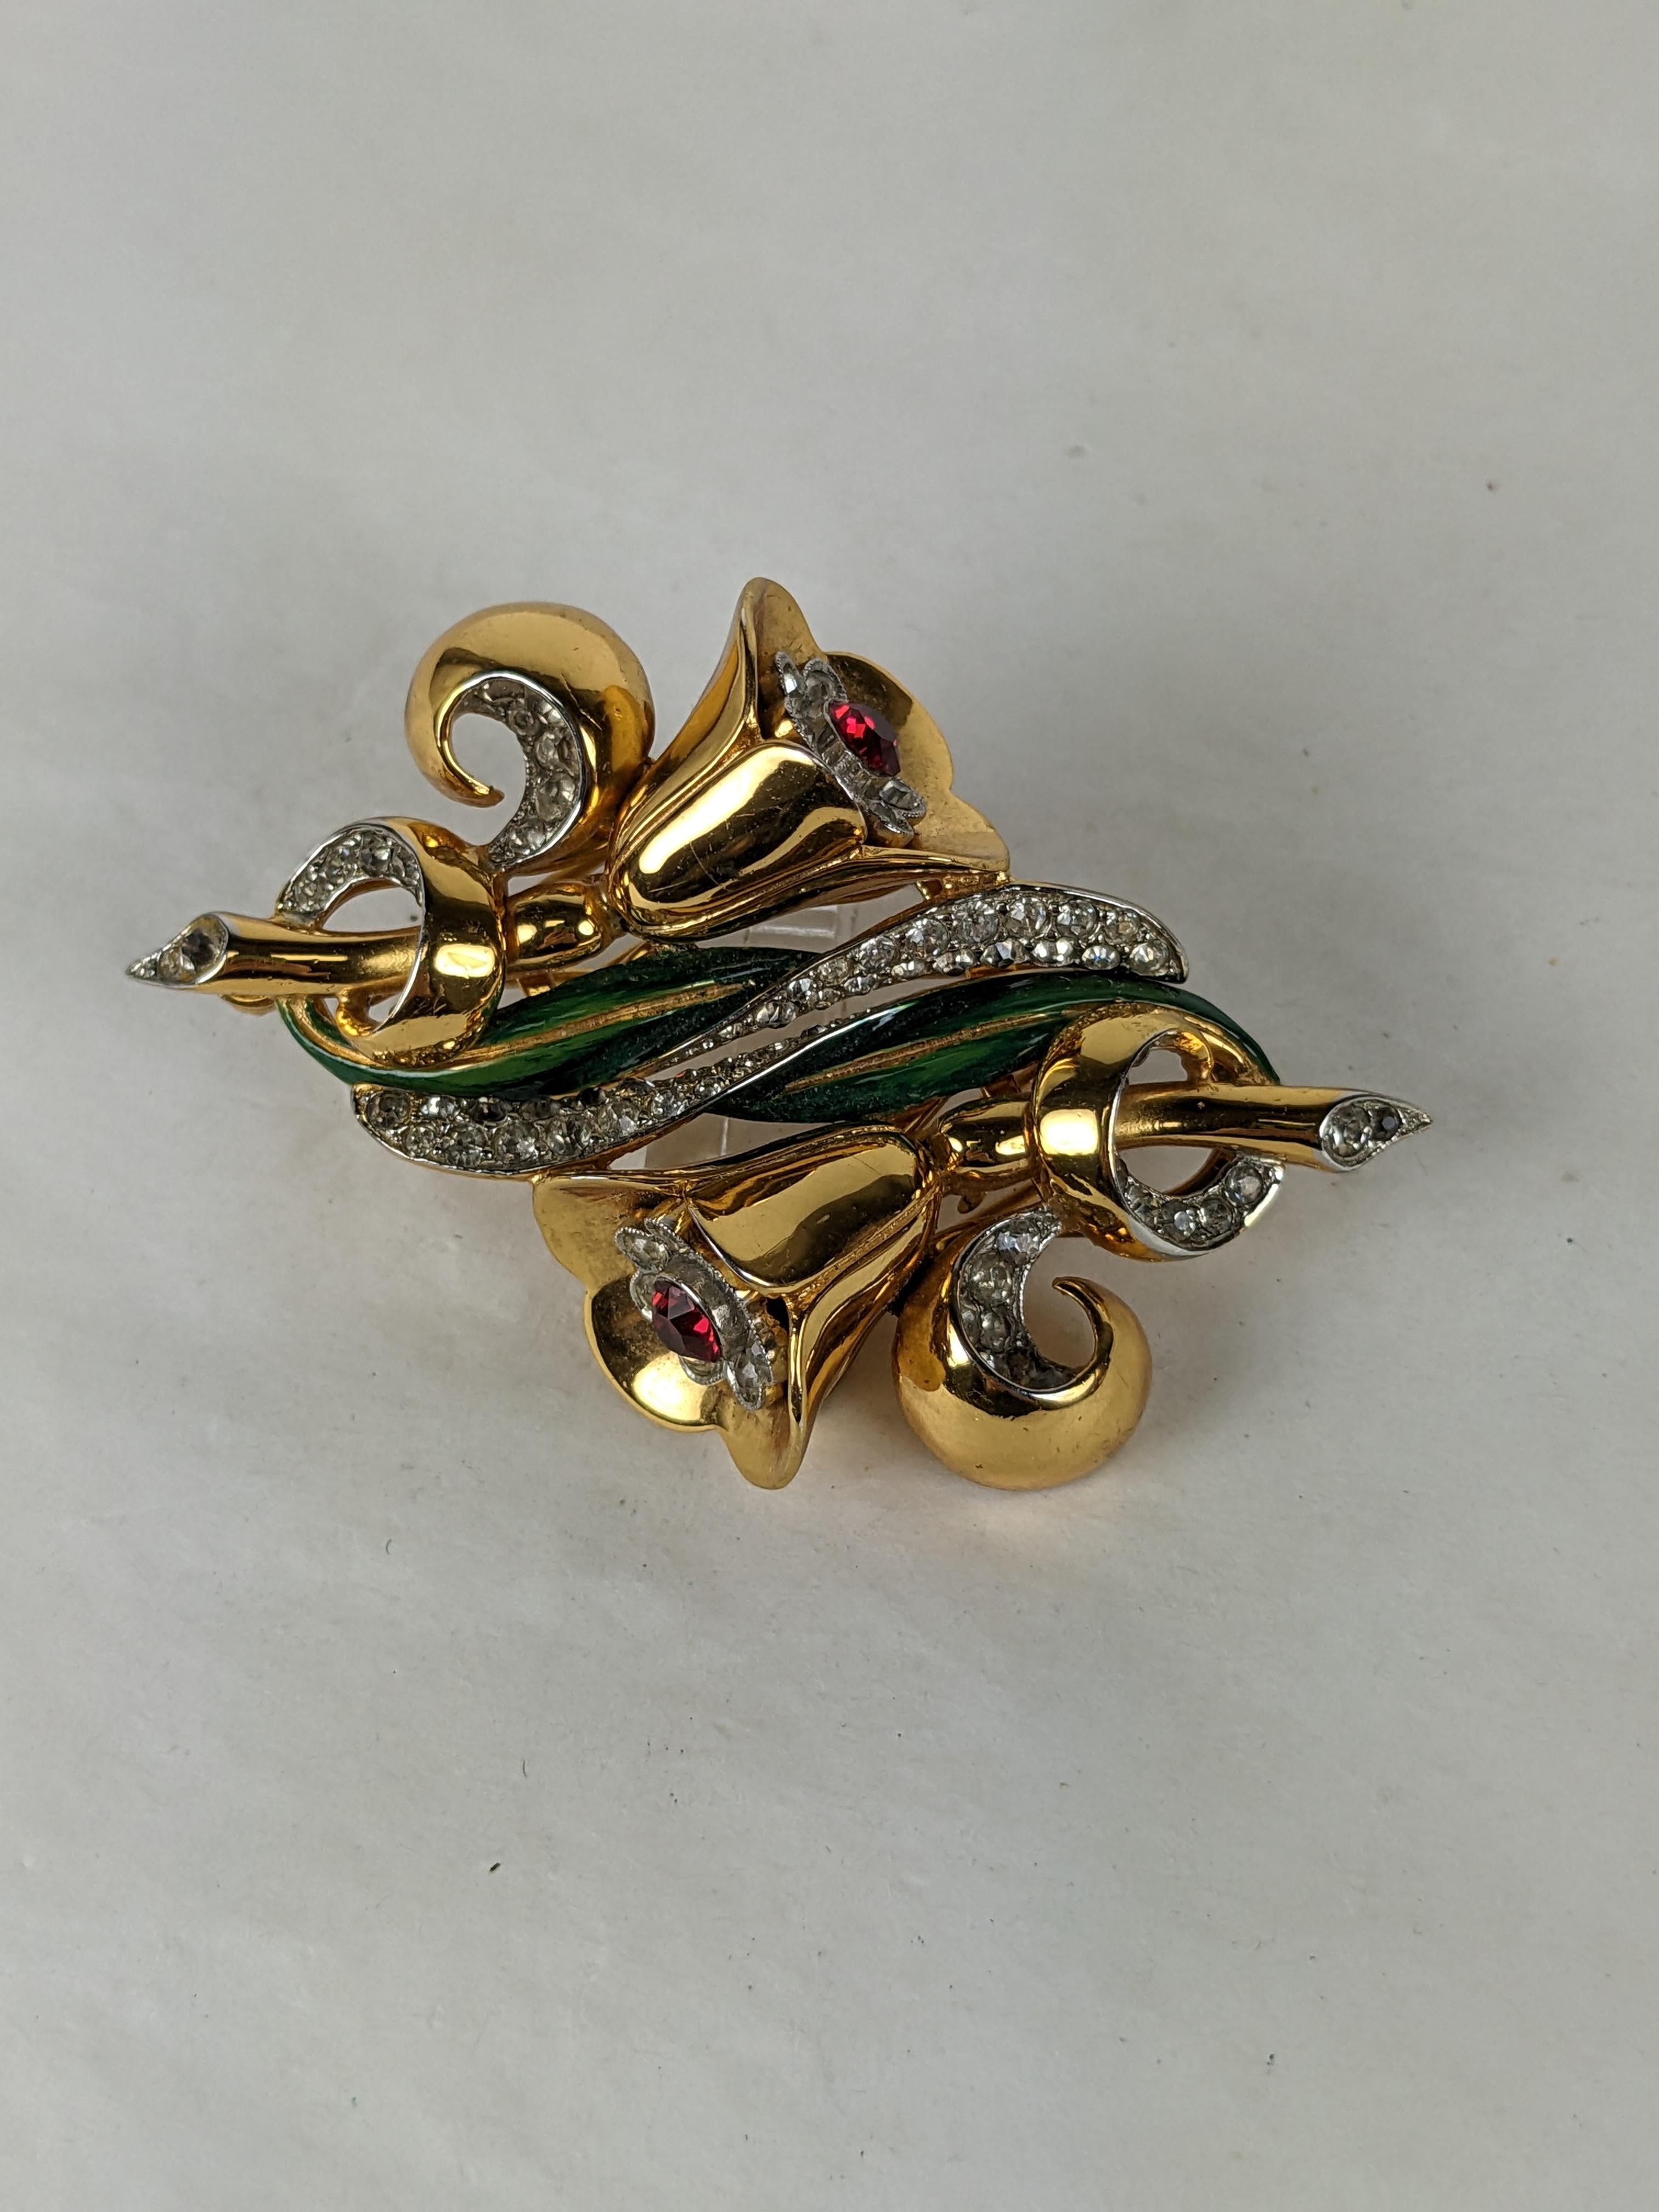 Rare Corocraft Sterling Vermeil Bellflower Duette Brooch from the 1940's. Wonderful design with conjoined flower clips which remove from their base to be worn separately. Highlighted with enamel and paste stones. 2.8